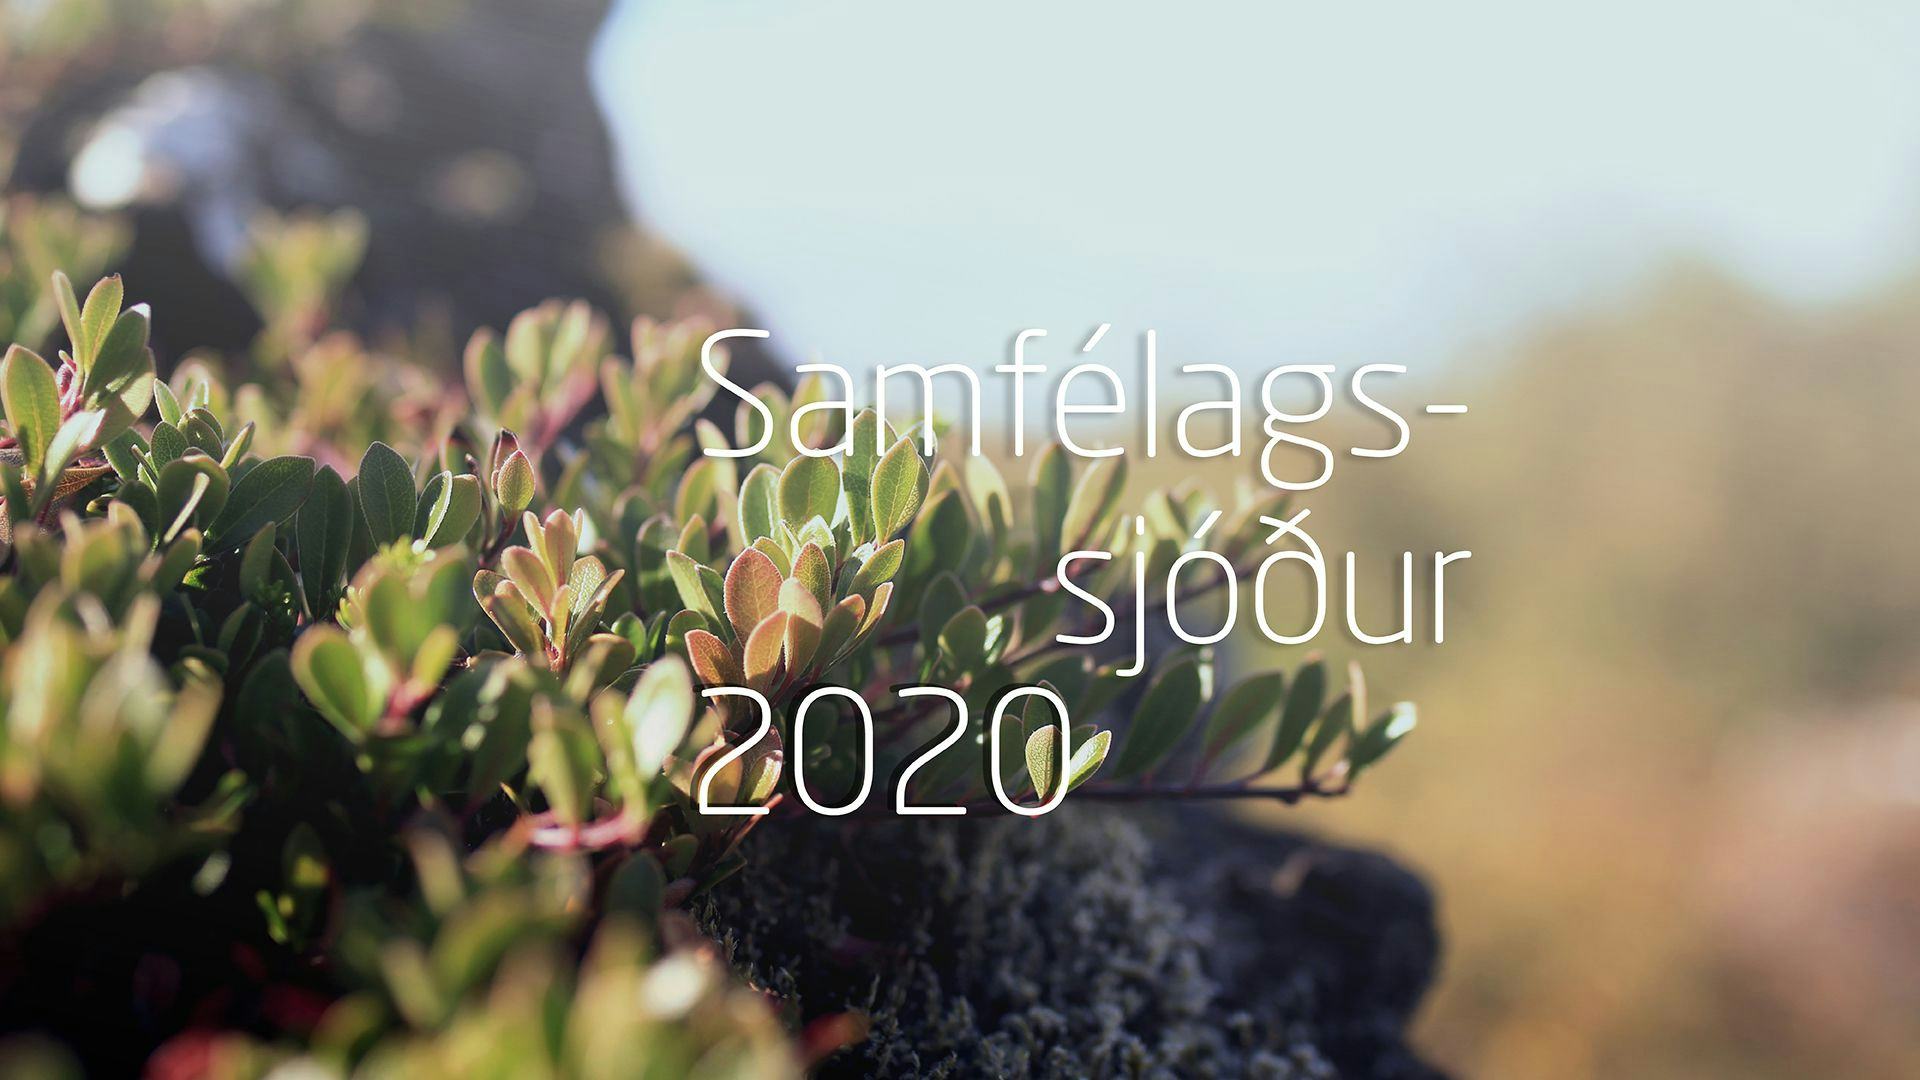 Photo of a sunlit green plants with the text "Samfelagssjodur 2020" superimposed over it